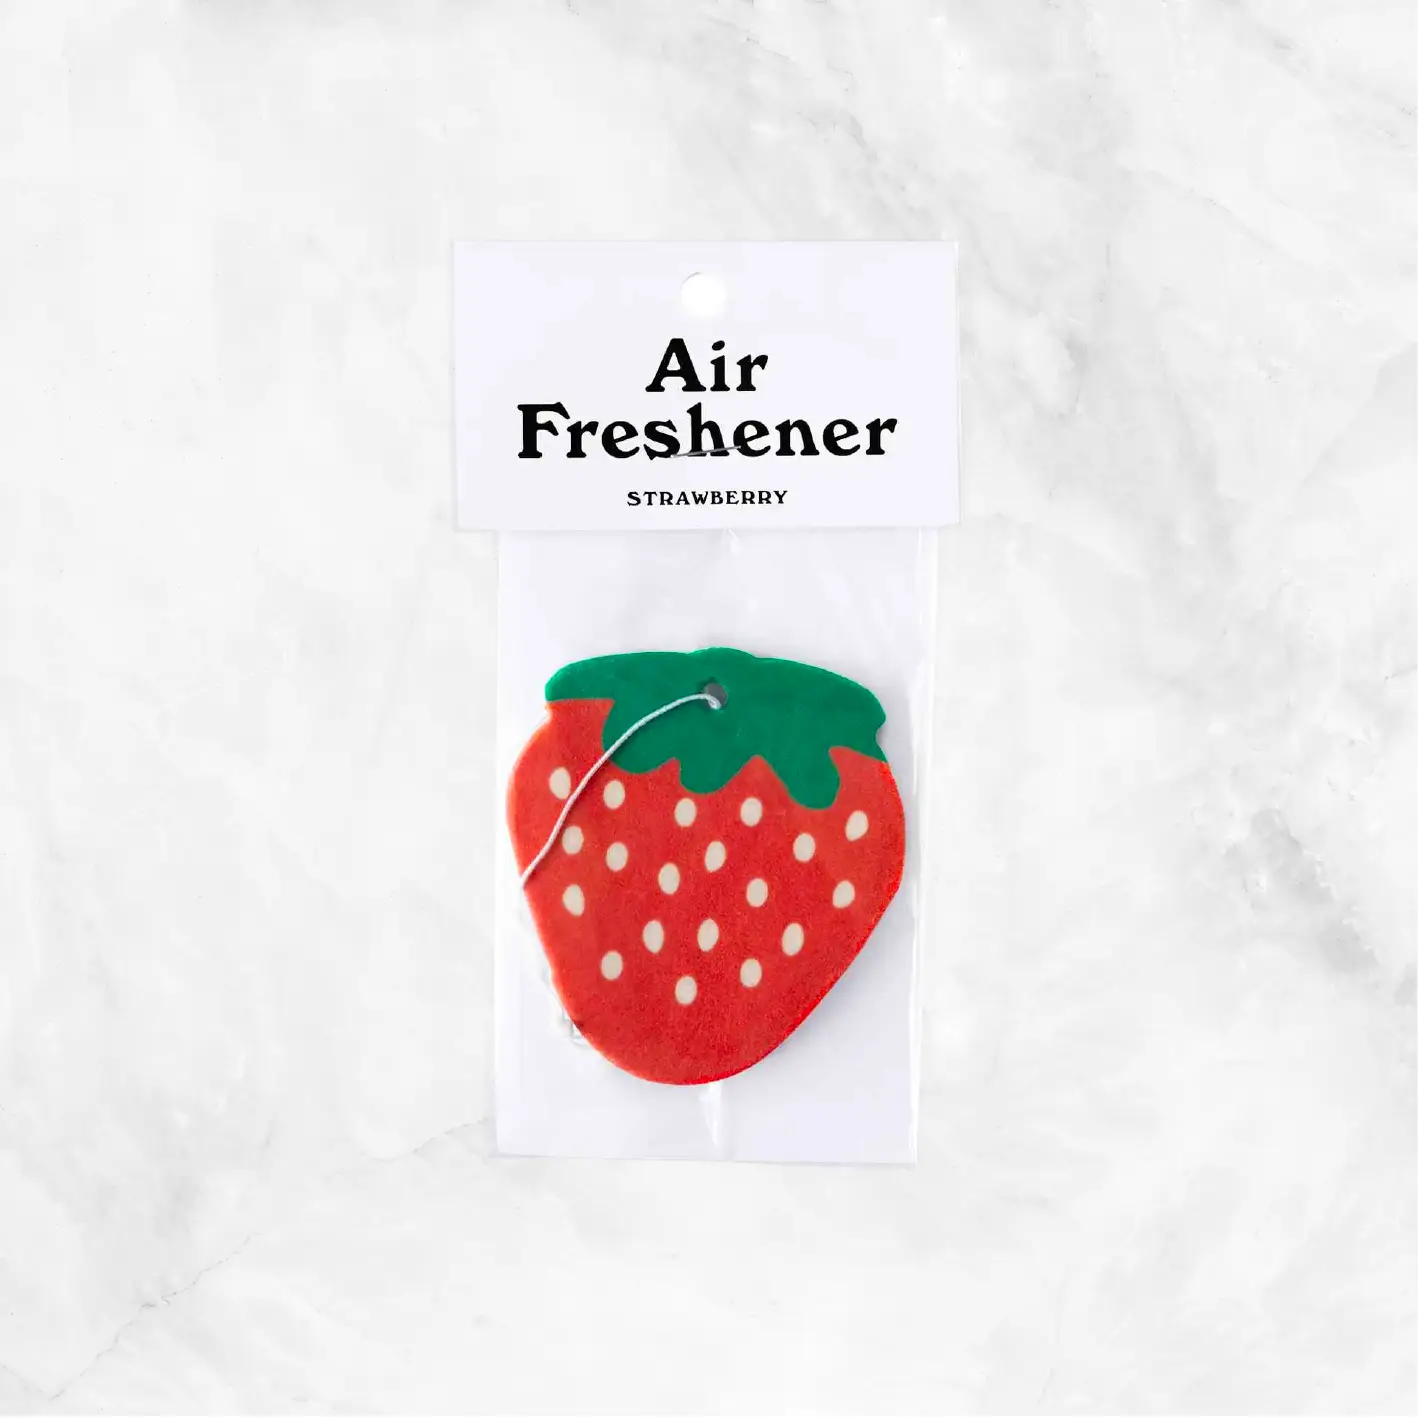 Air Freshener - Strawberry Delivery